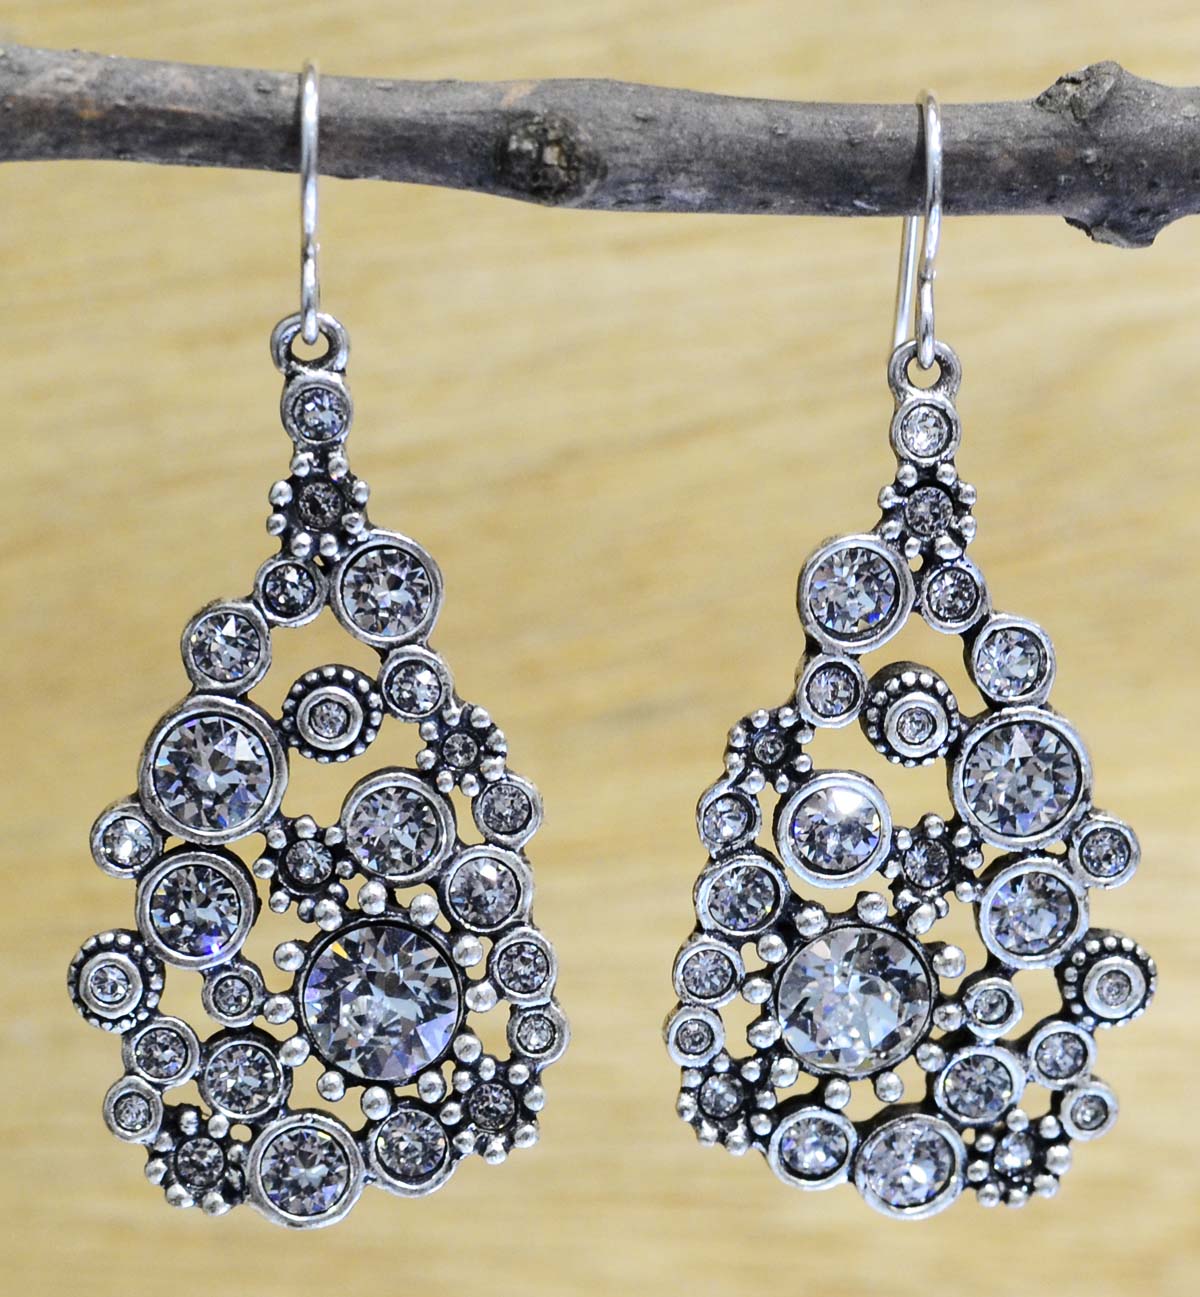 Glam silver tone earrings in color "All Crystal"